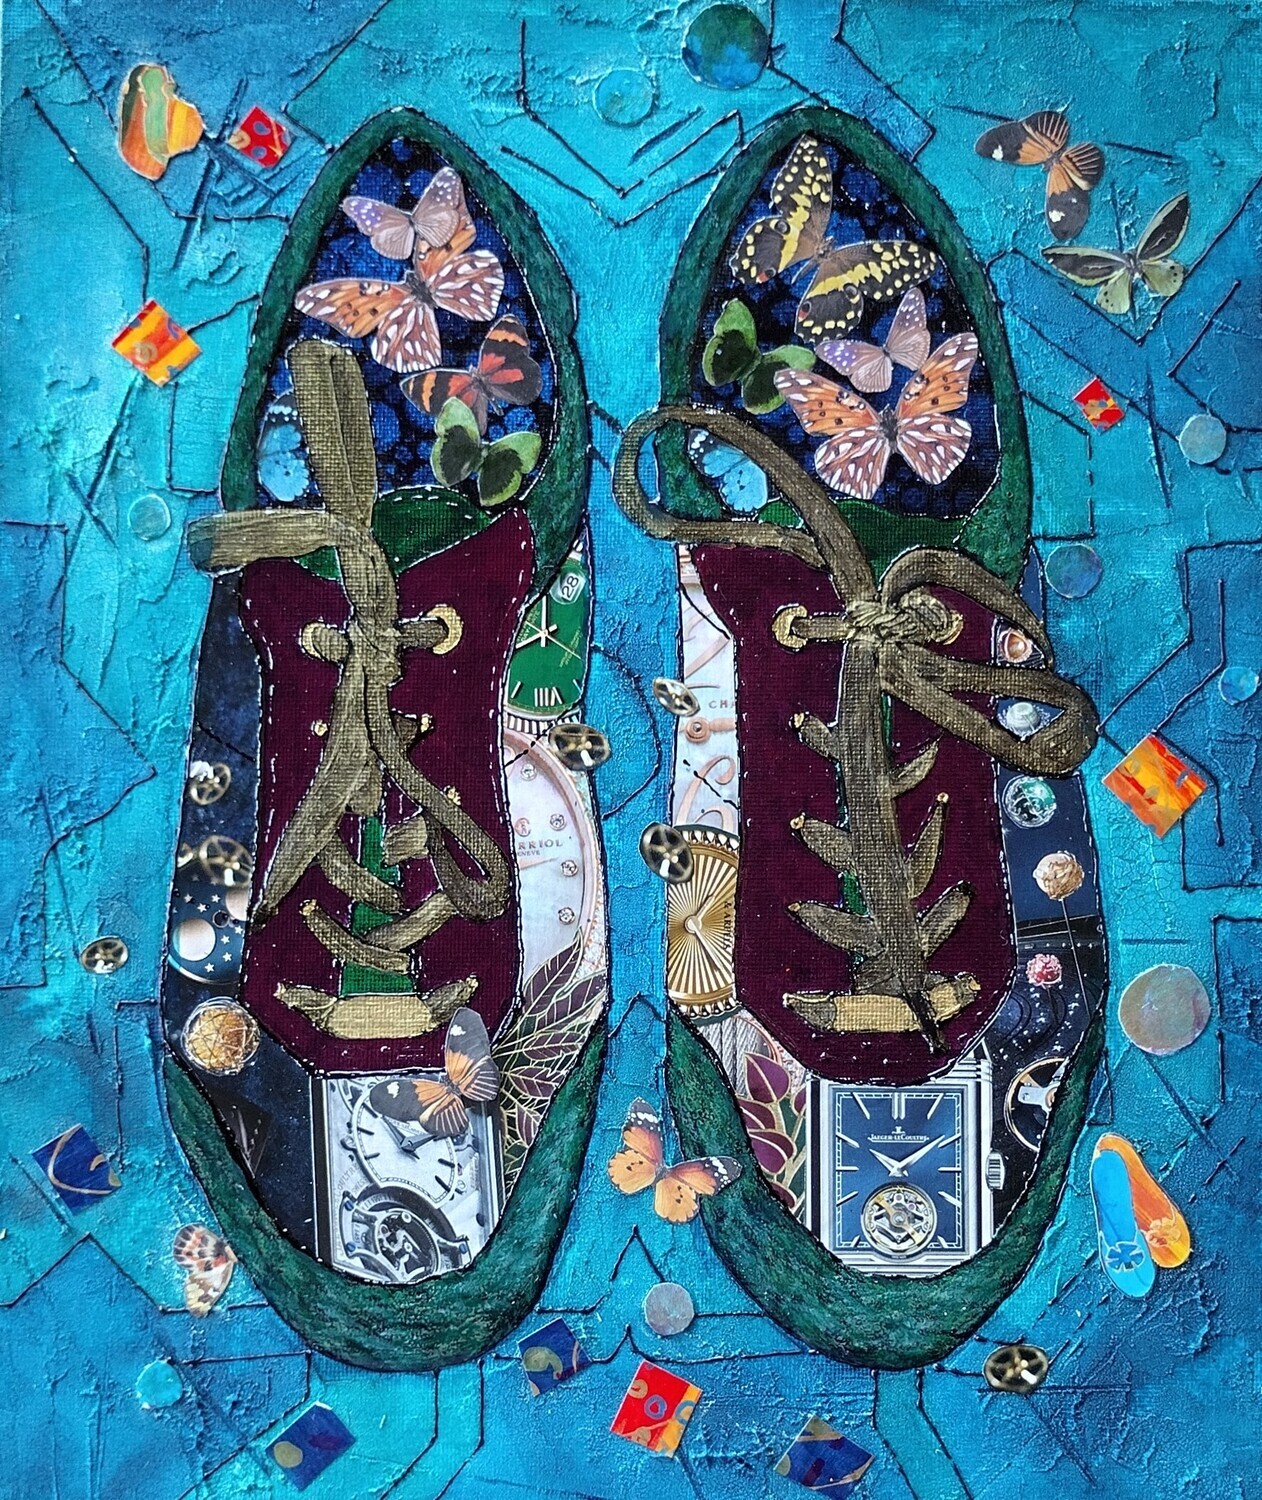 My Shoes, limited edition print set of 4